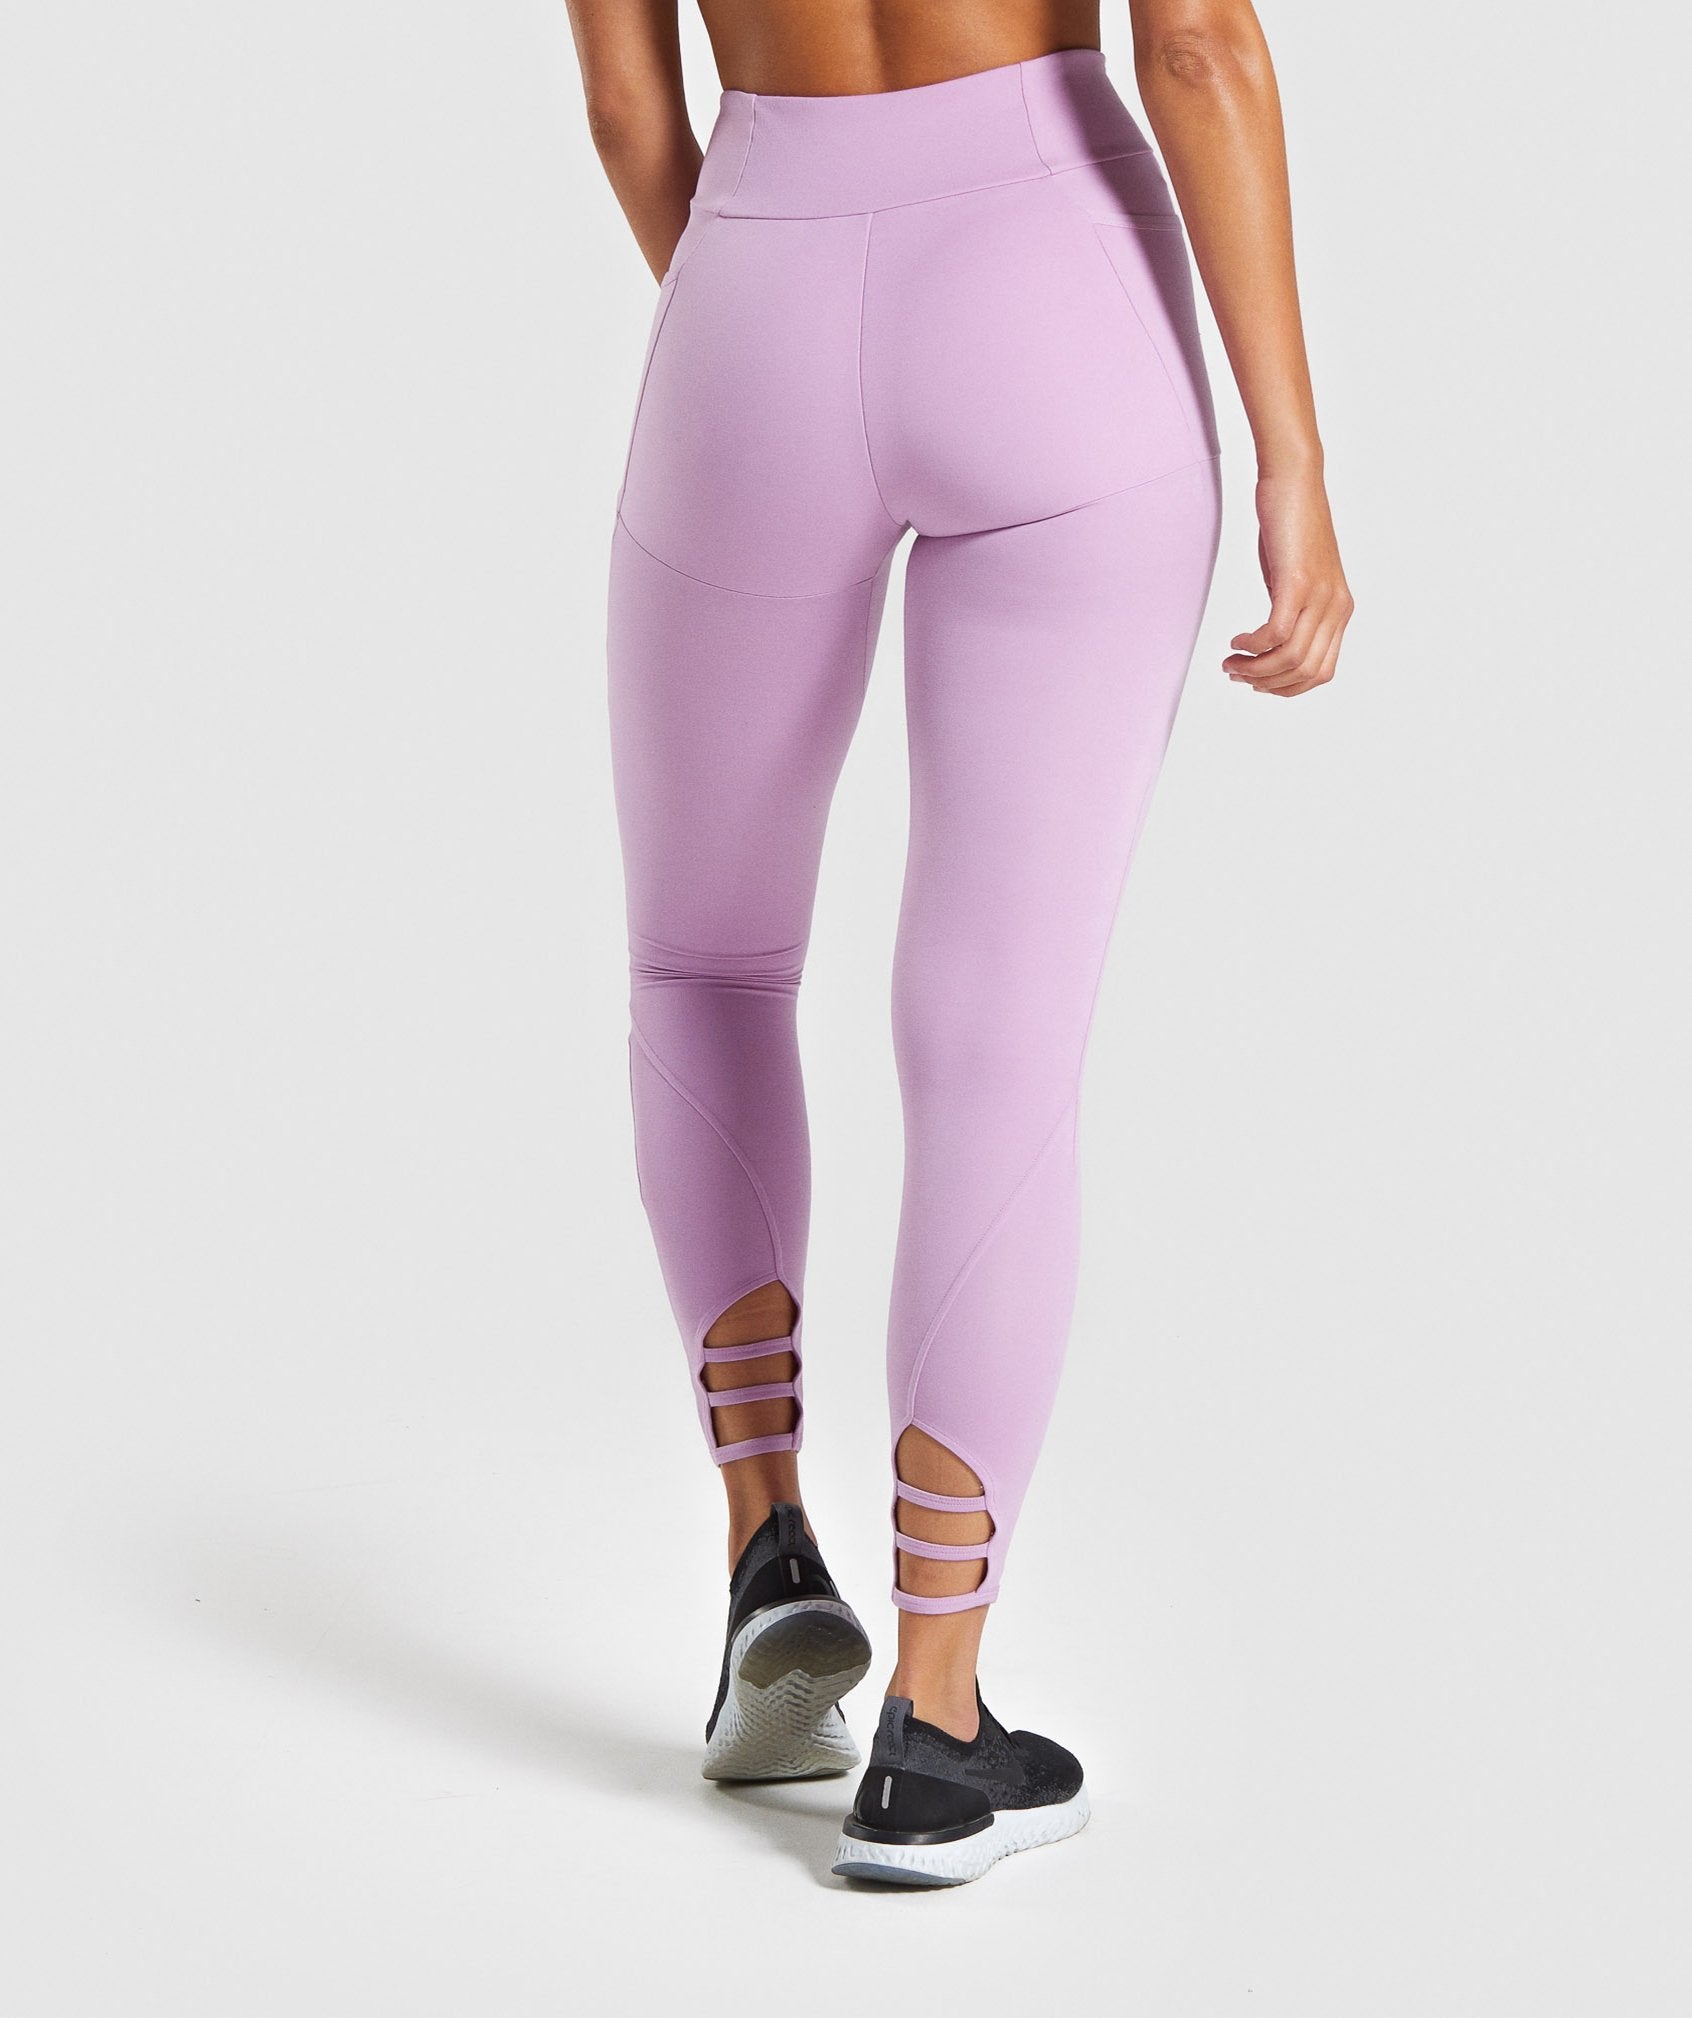 Poise Leggings in Pink - view 2